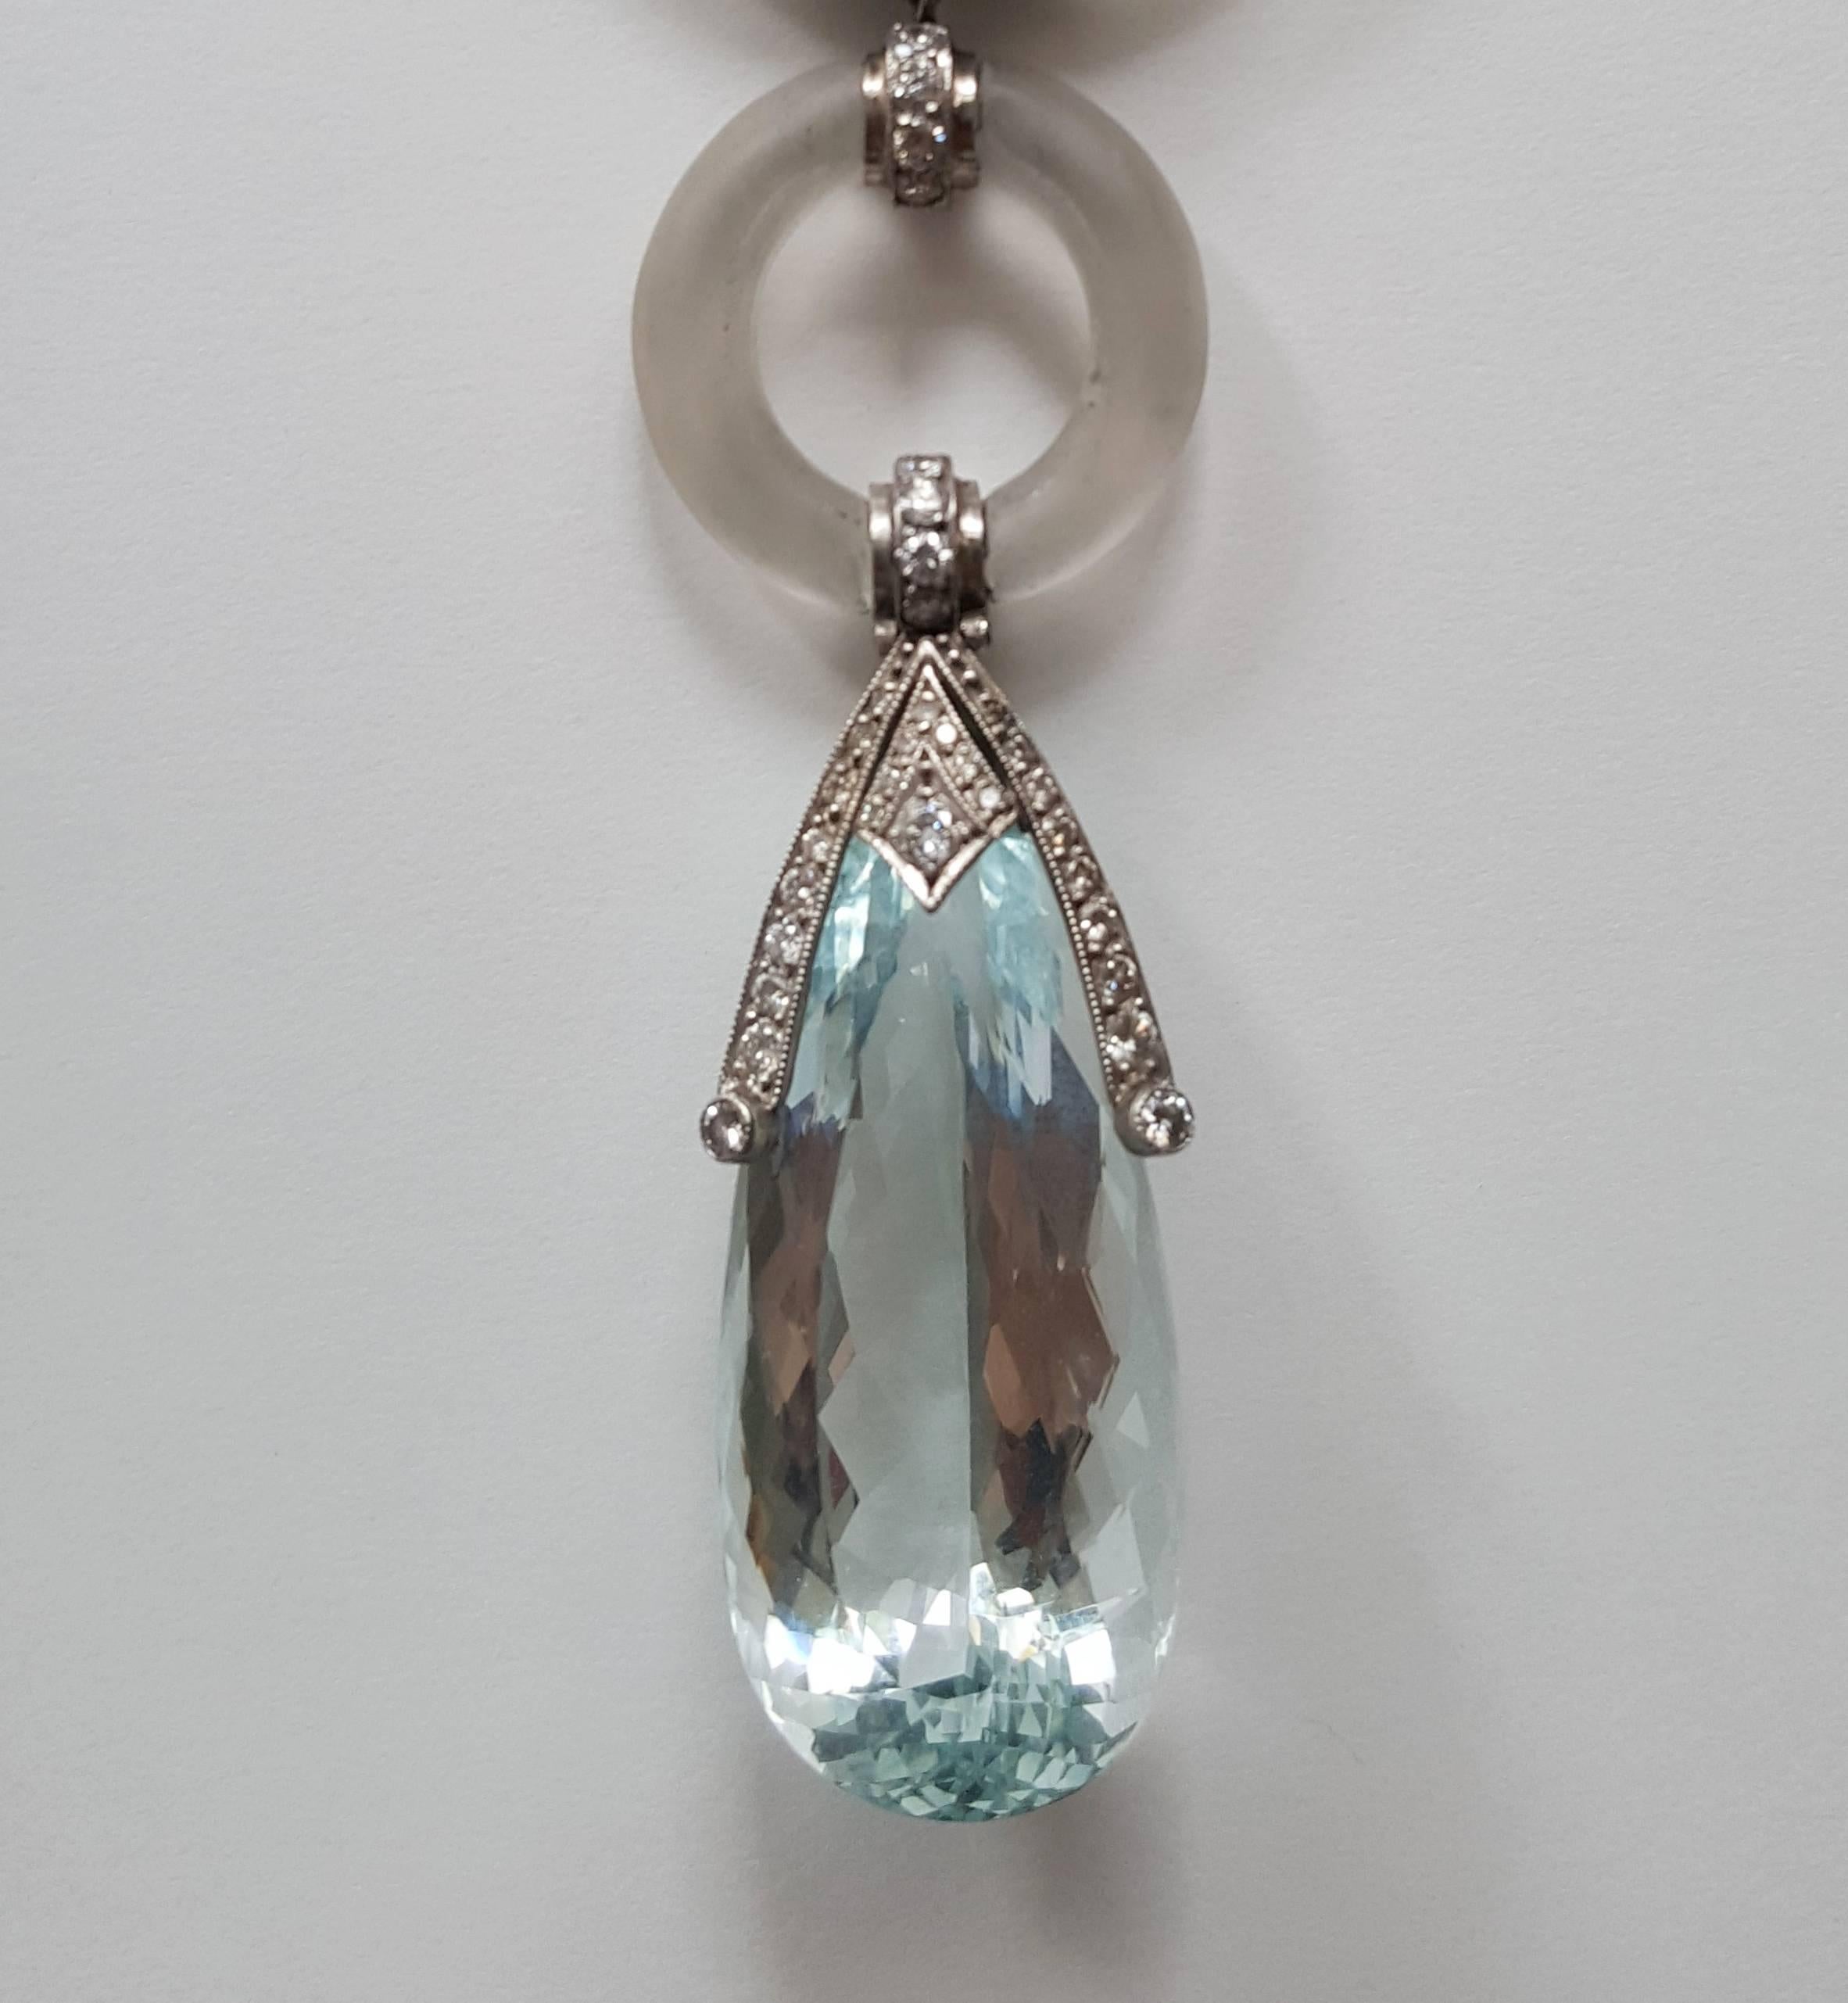 A real eye-catcher set with large drop shaped aquamarine with a weight of circa 26,0 ct., 59 brilliant-cut diamonds weighing ca. 1,88 ct. and 2 satin-finished rock crystal rings. Mounted in platinum. With 18 carat white gold chain. Total weight: